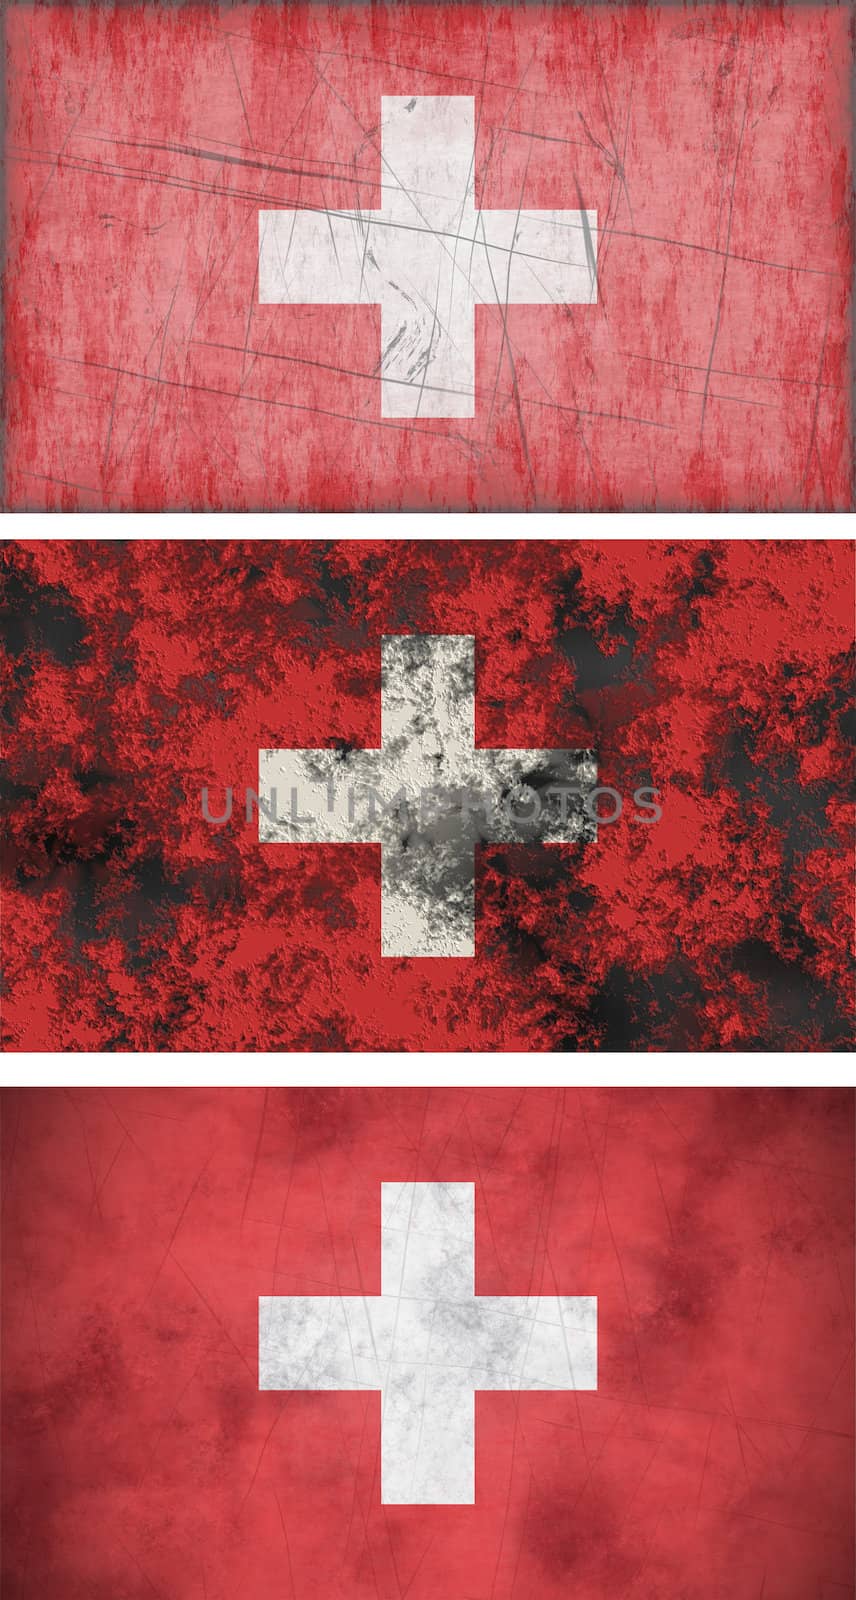 Great Image of the Flag of Switzerland